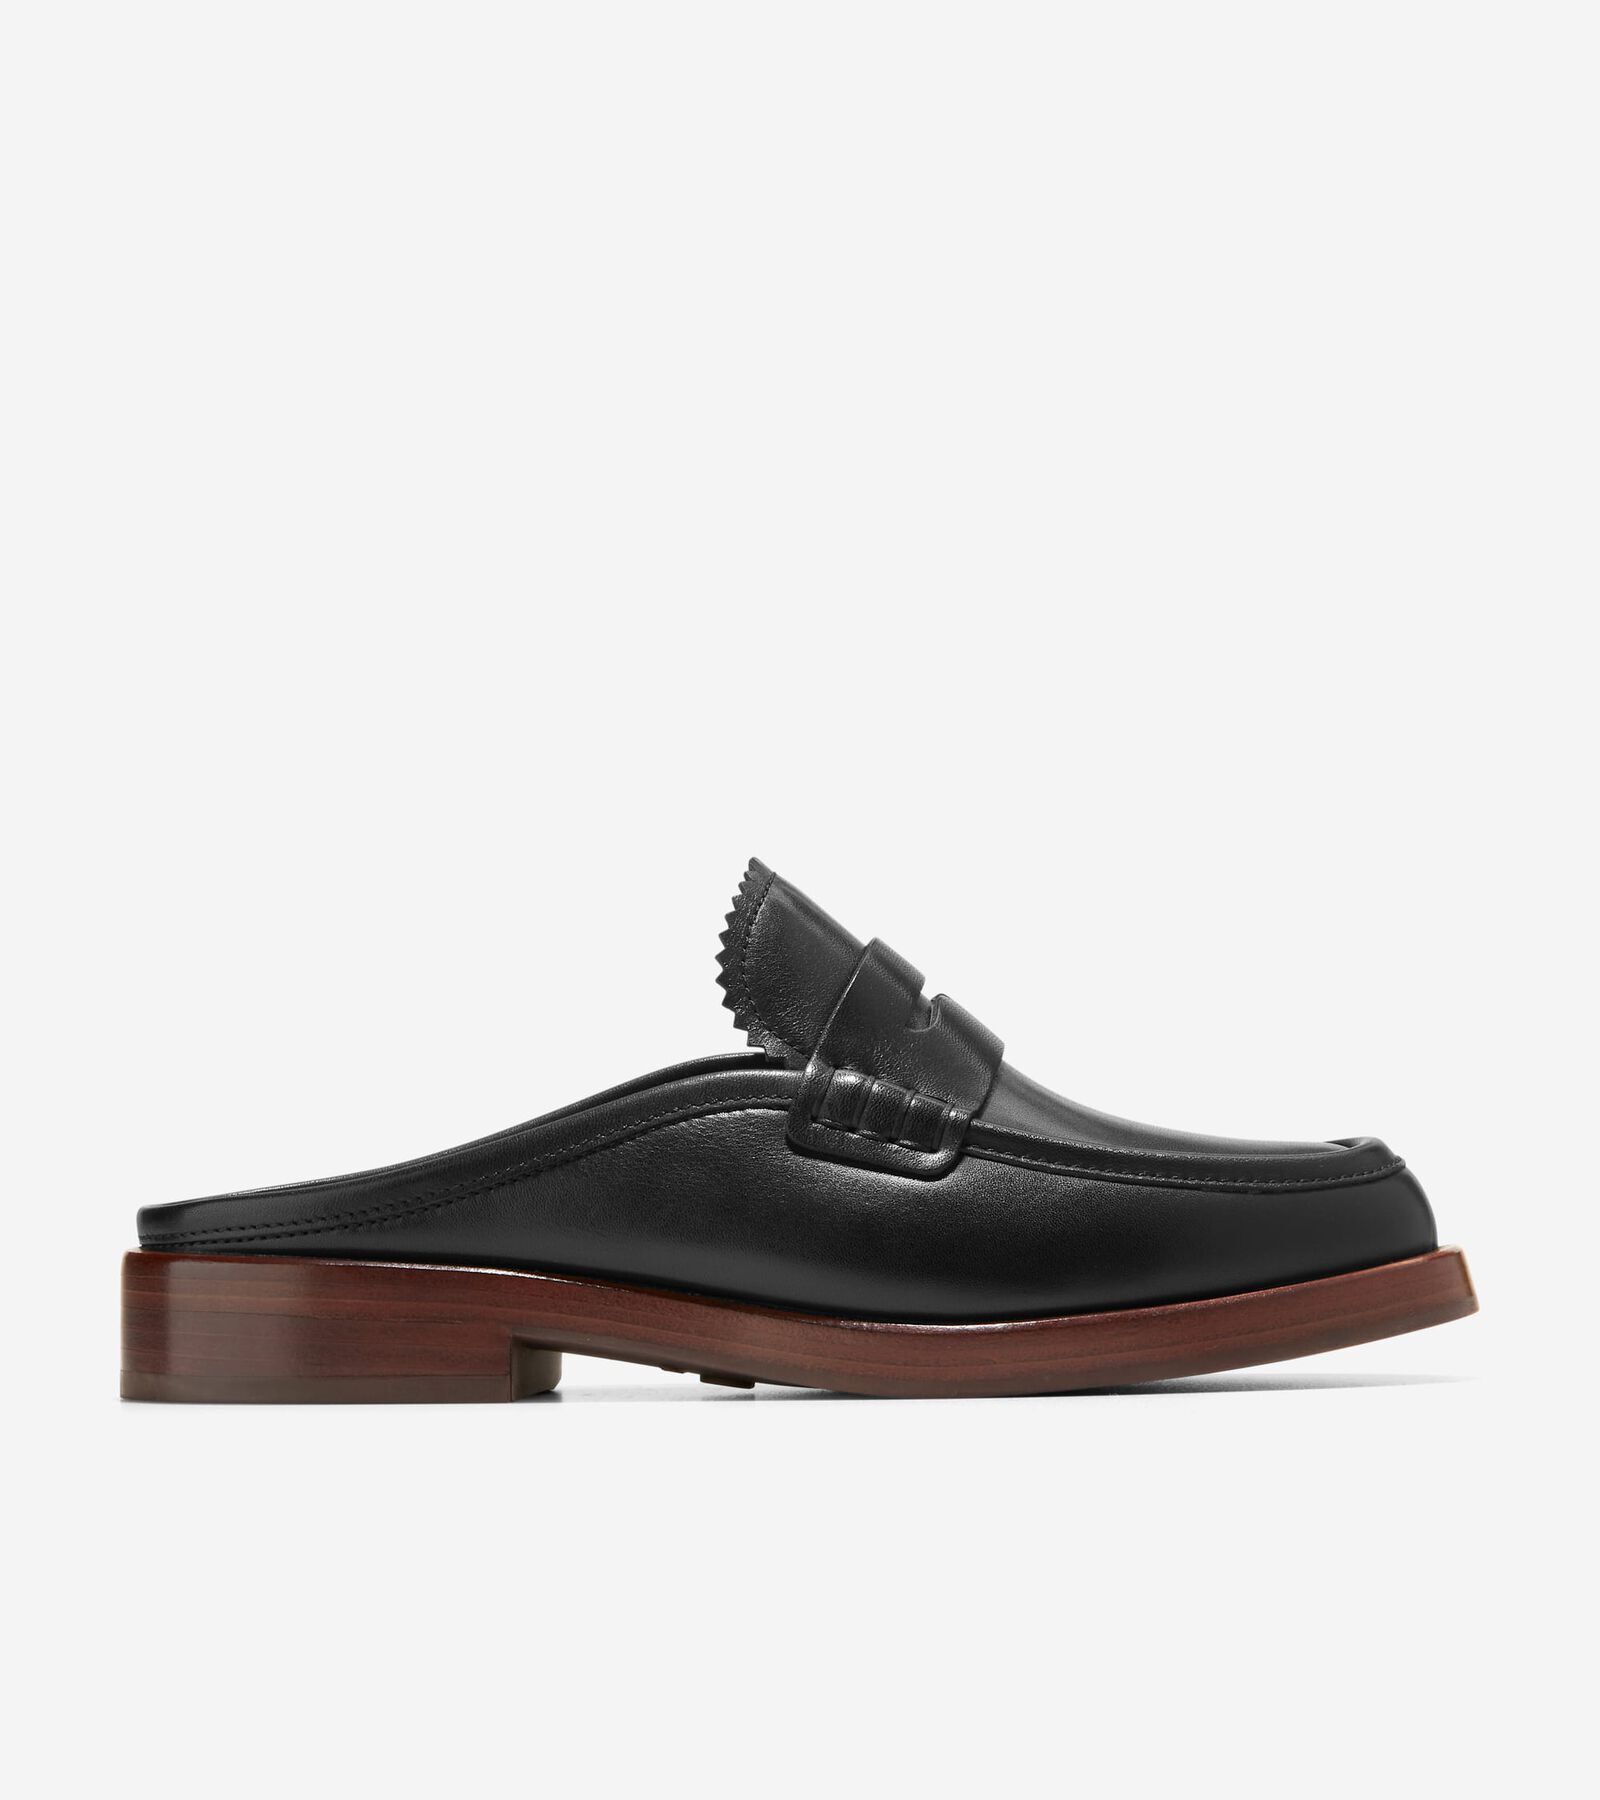 Cole Haan Chelby Mule - Black - Size: 8